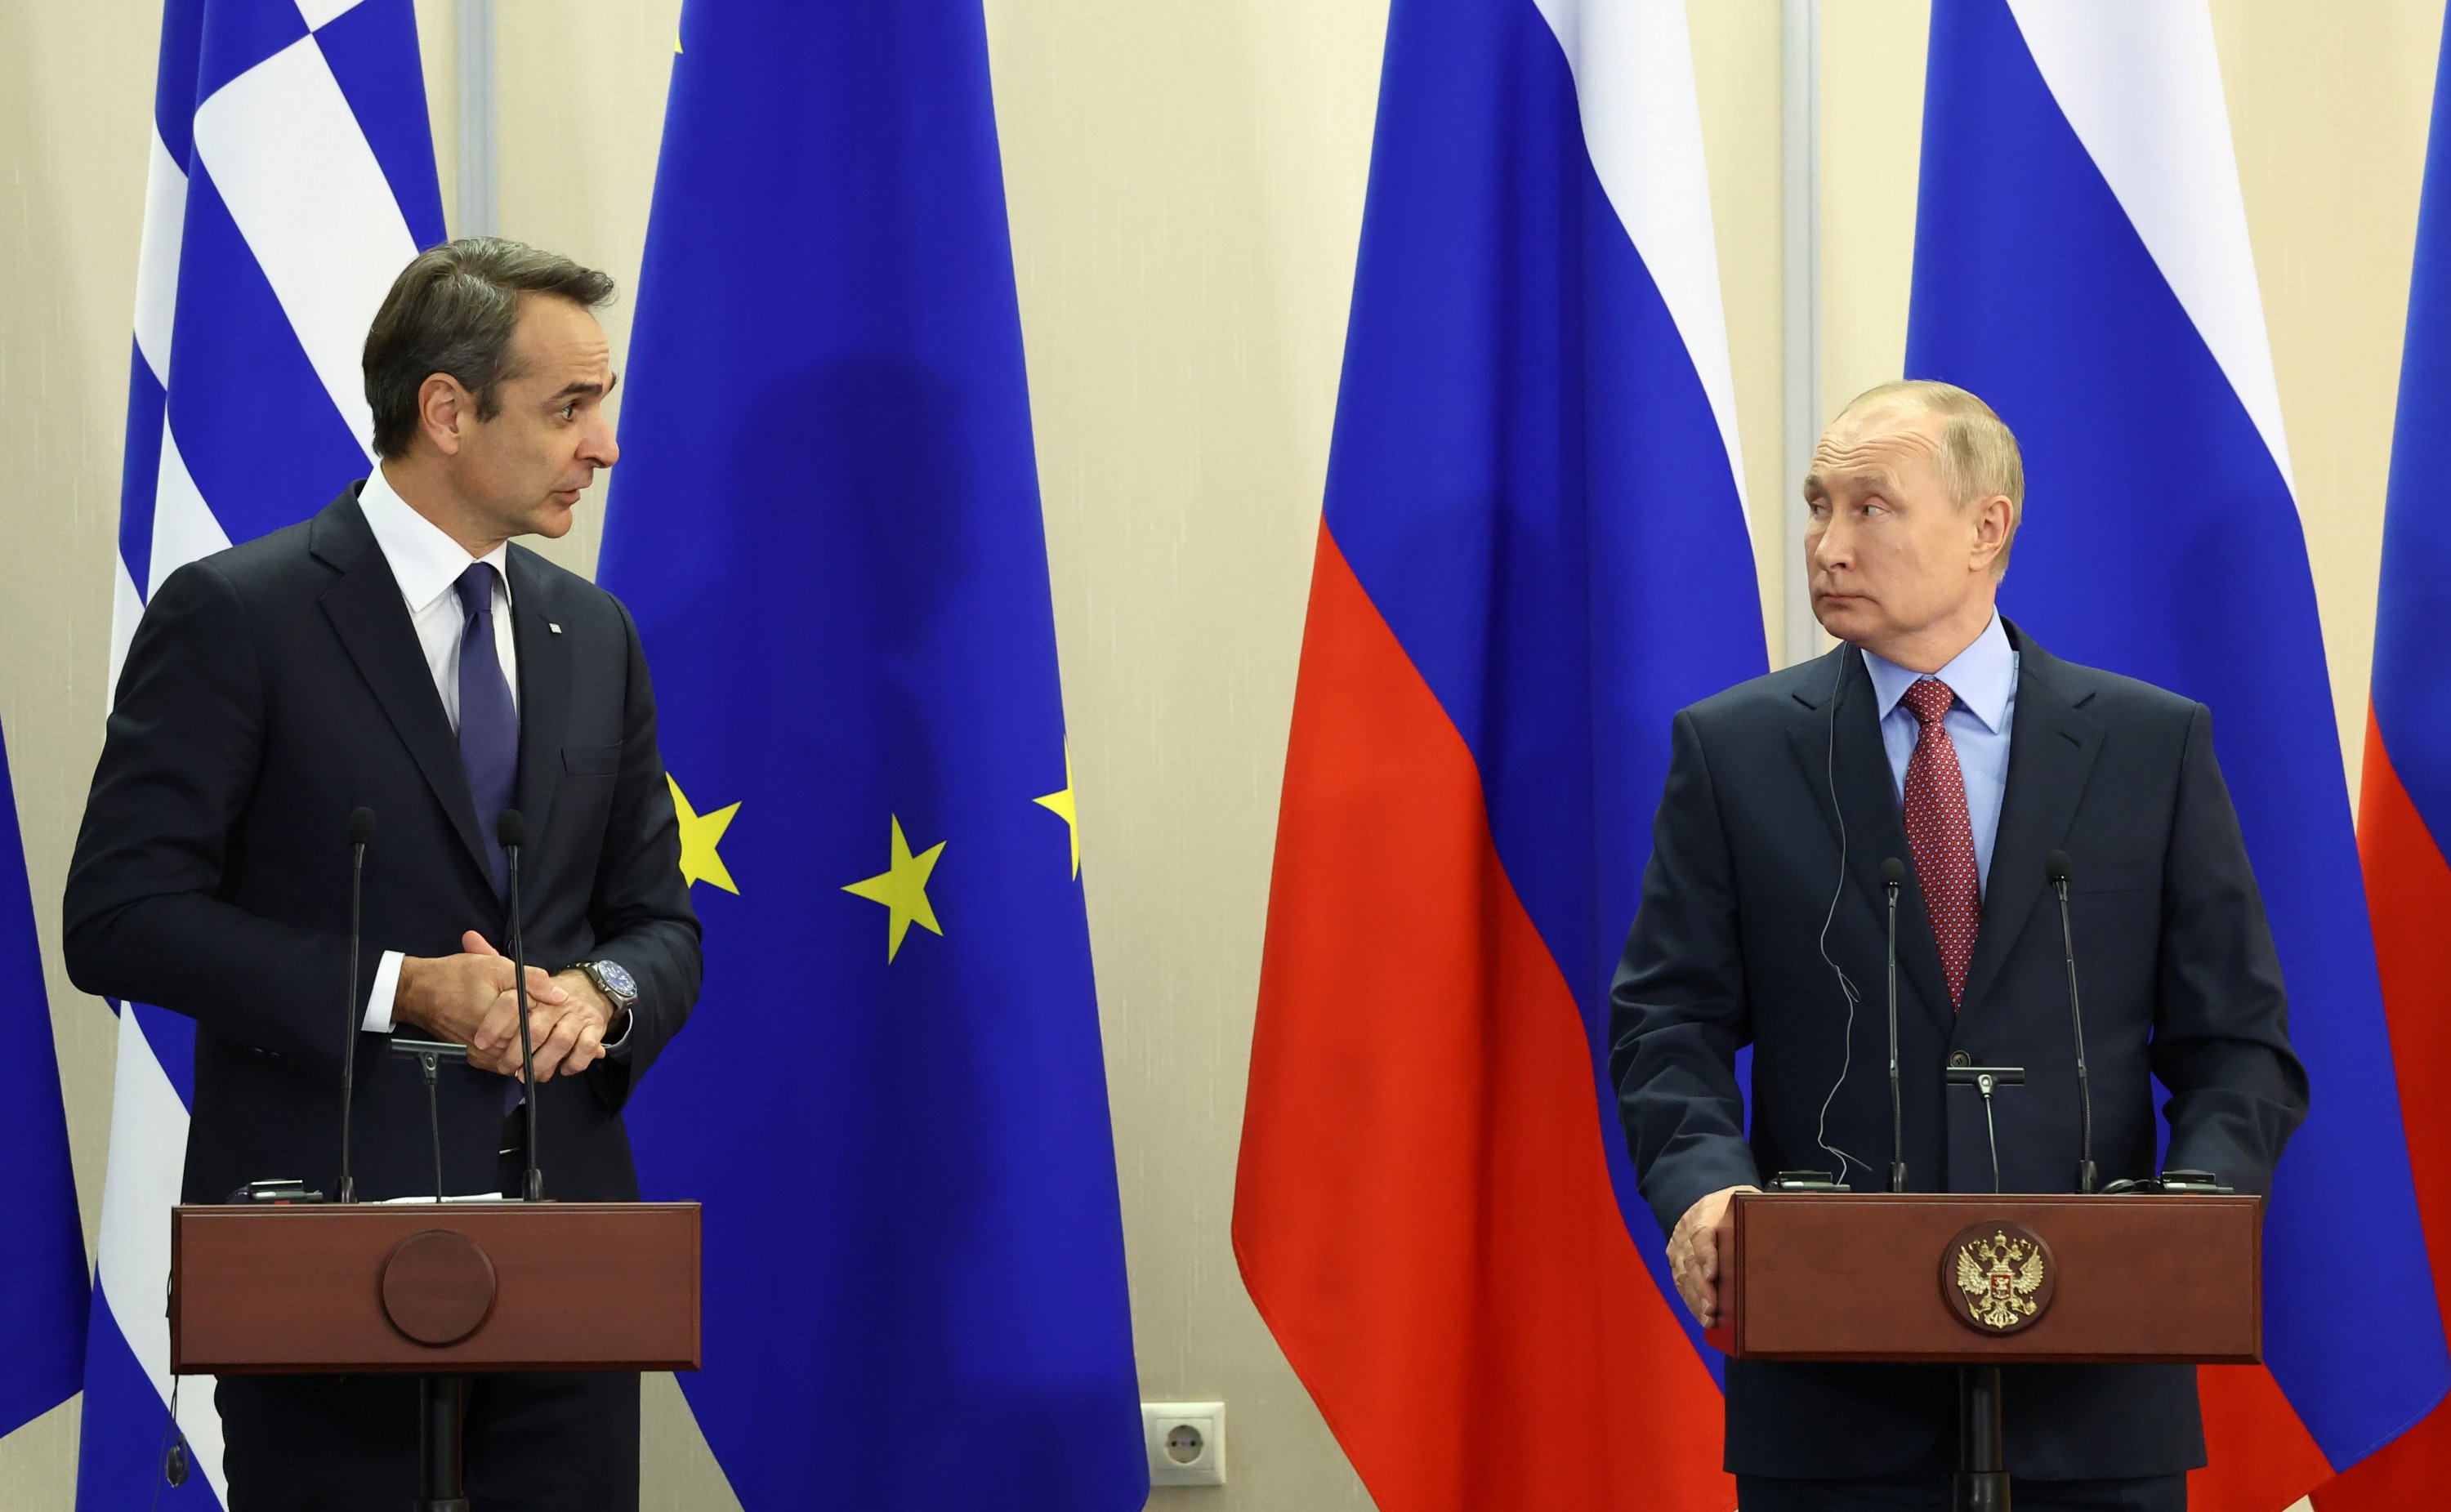 Russia supports fair resolution of Cyprus issue, Putin says | Daily Sabah